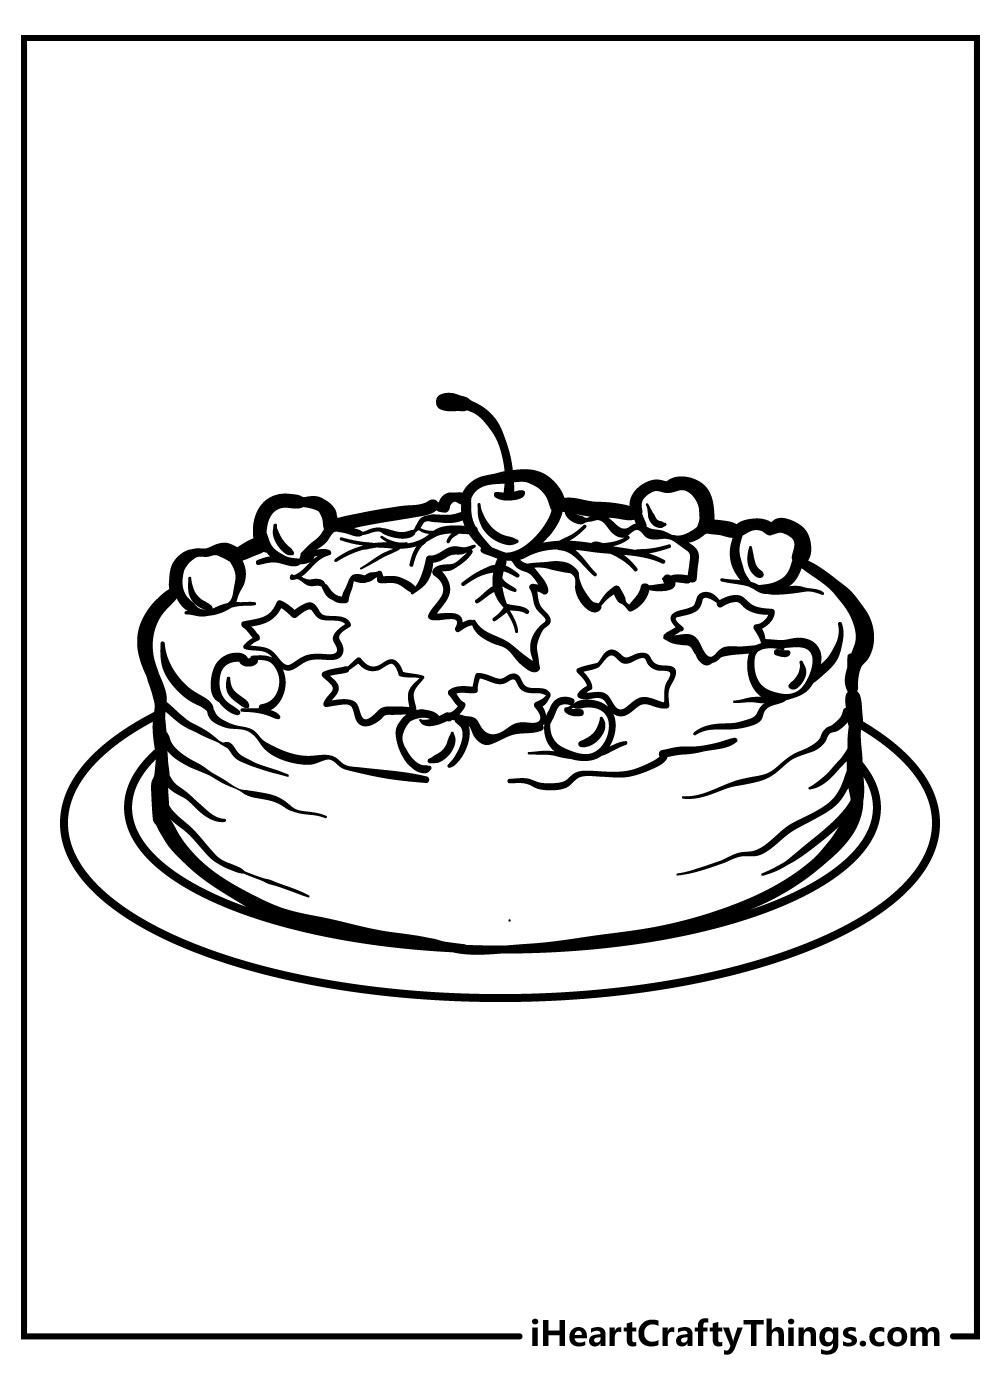 hello kitty birthday cake coloring pages 